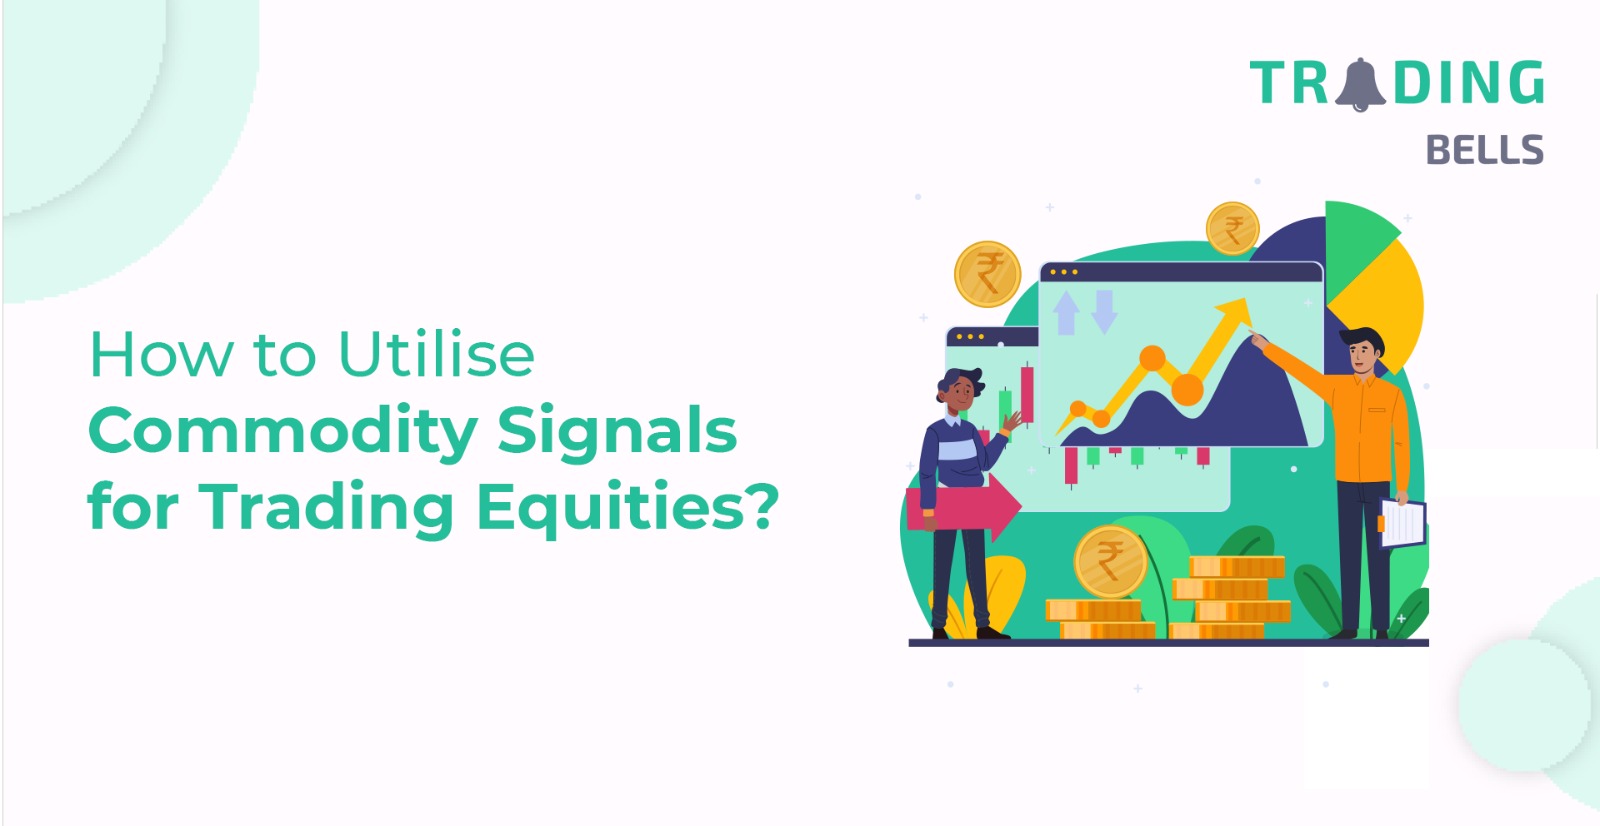 Commodity Signals for Trading Equities